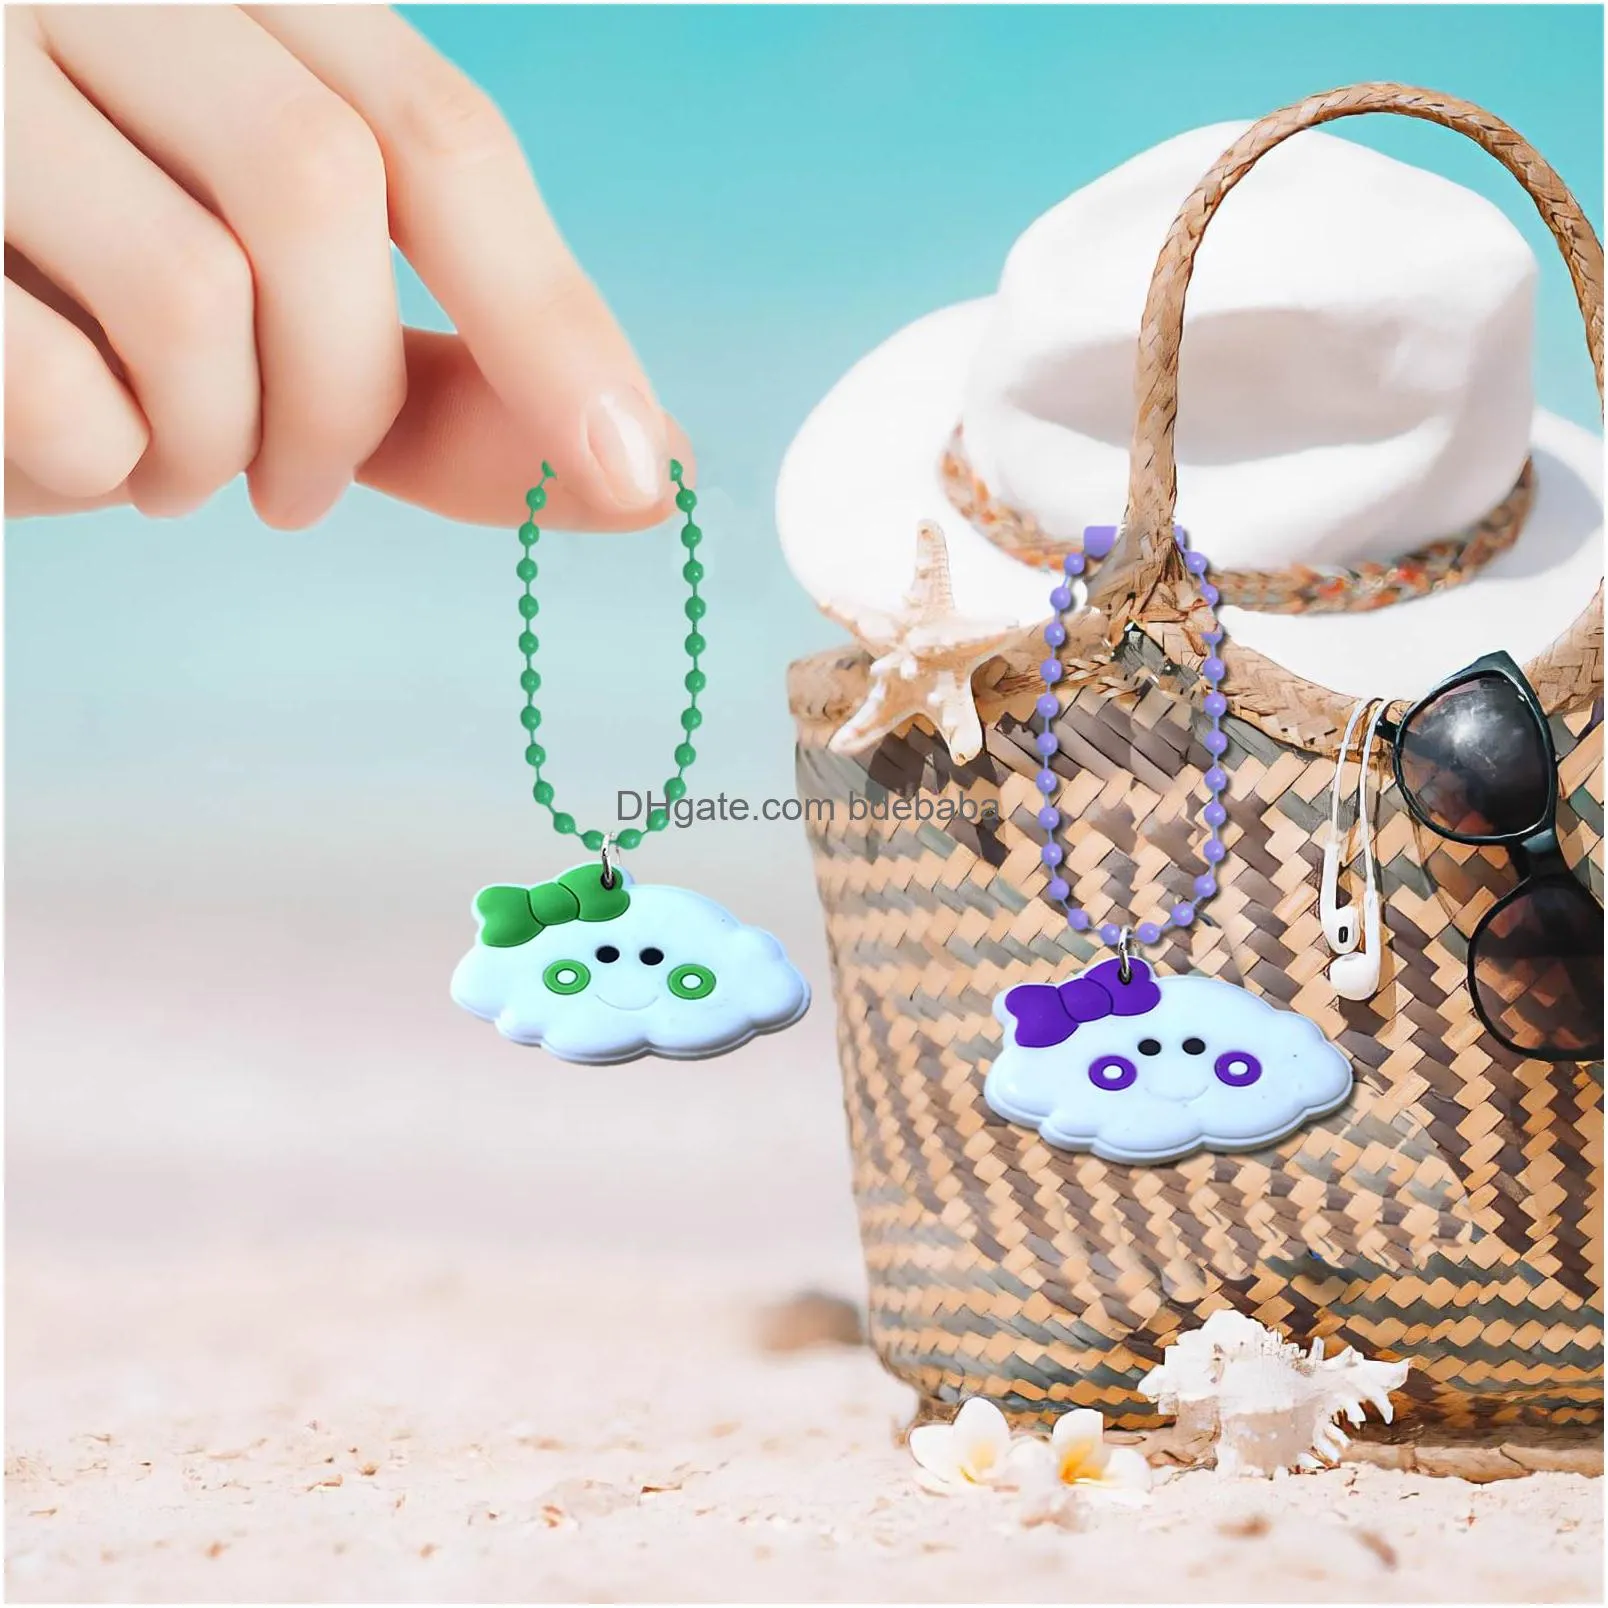 10pcs cartoon clouds keychain colorful ball bead keychains fits bag key dolls label hand tag for unisex